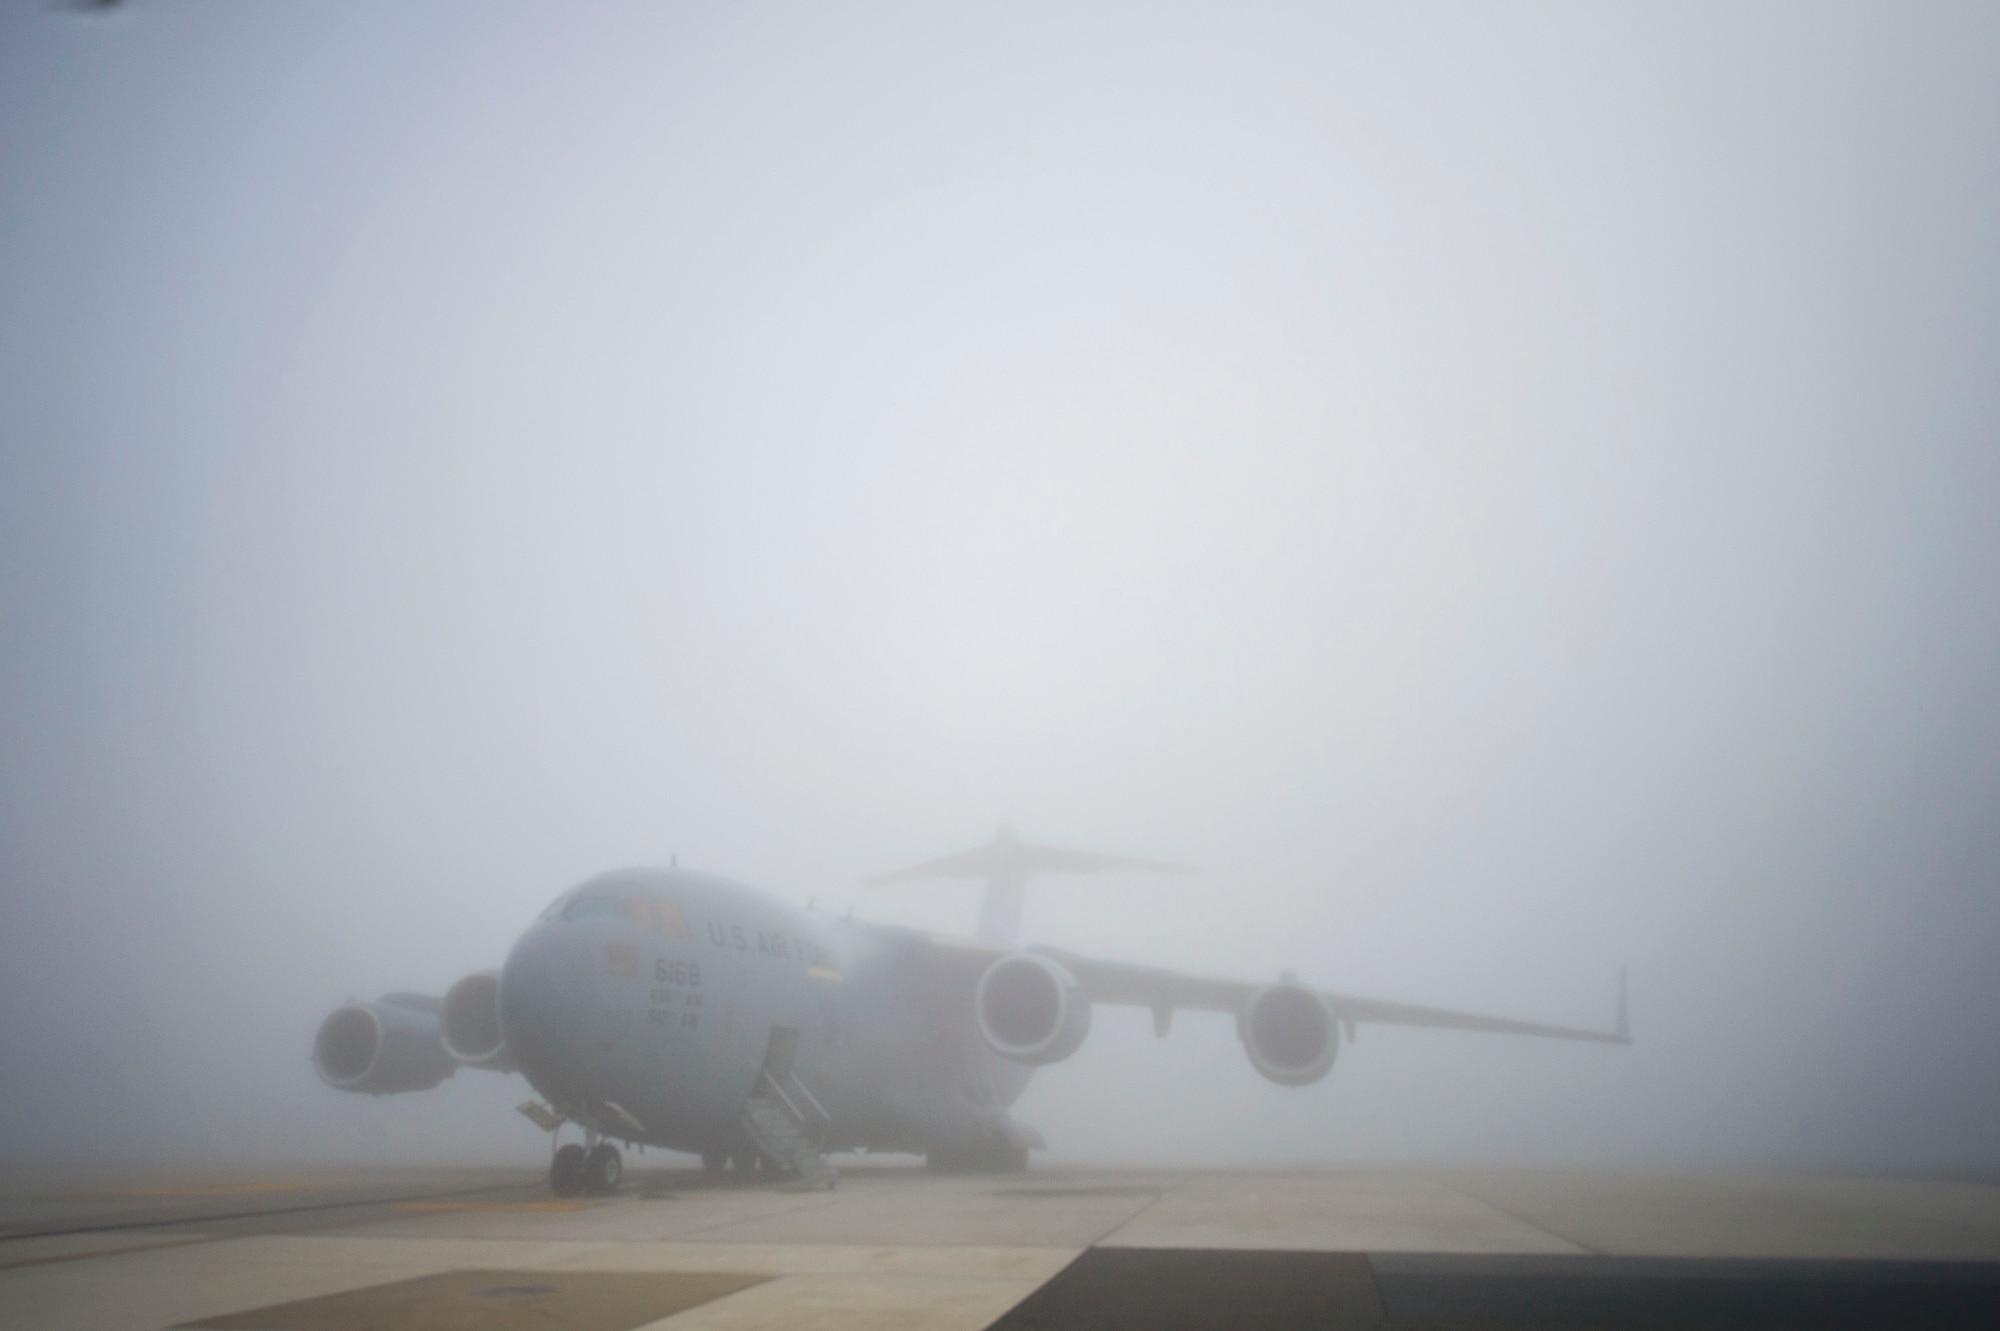 A Team Dover C-17 Globemaster III aircraft sits on the foggy runway waiting for the weather to clear before the mission launch at Dover Air Force Base, Del. The East Coast base is home to 13 C-17s, which provide rapid global mobility and global engagement. (U.S. Air Force photo/ Capt. Bernie Kale)